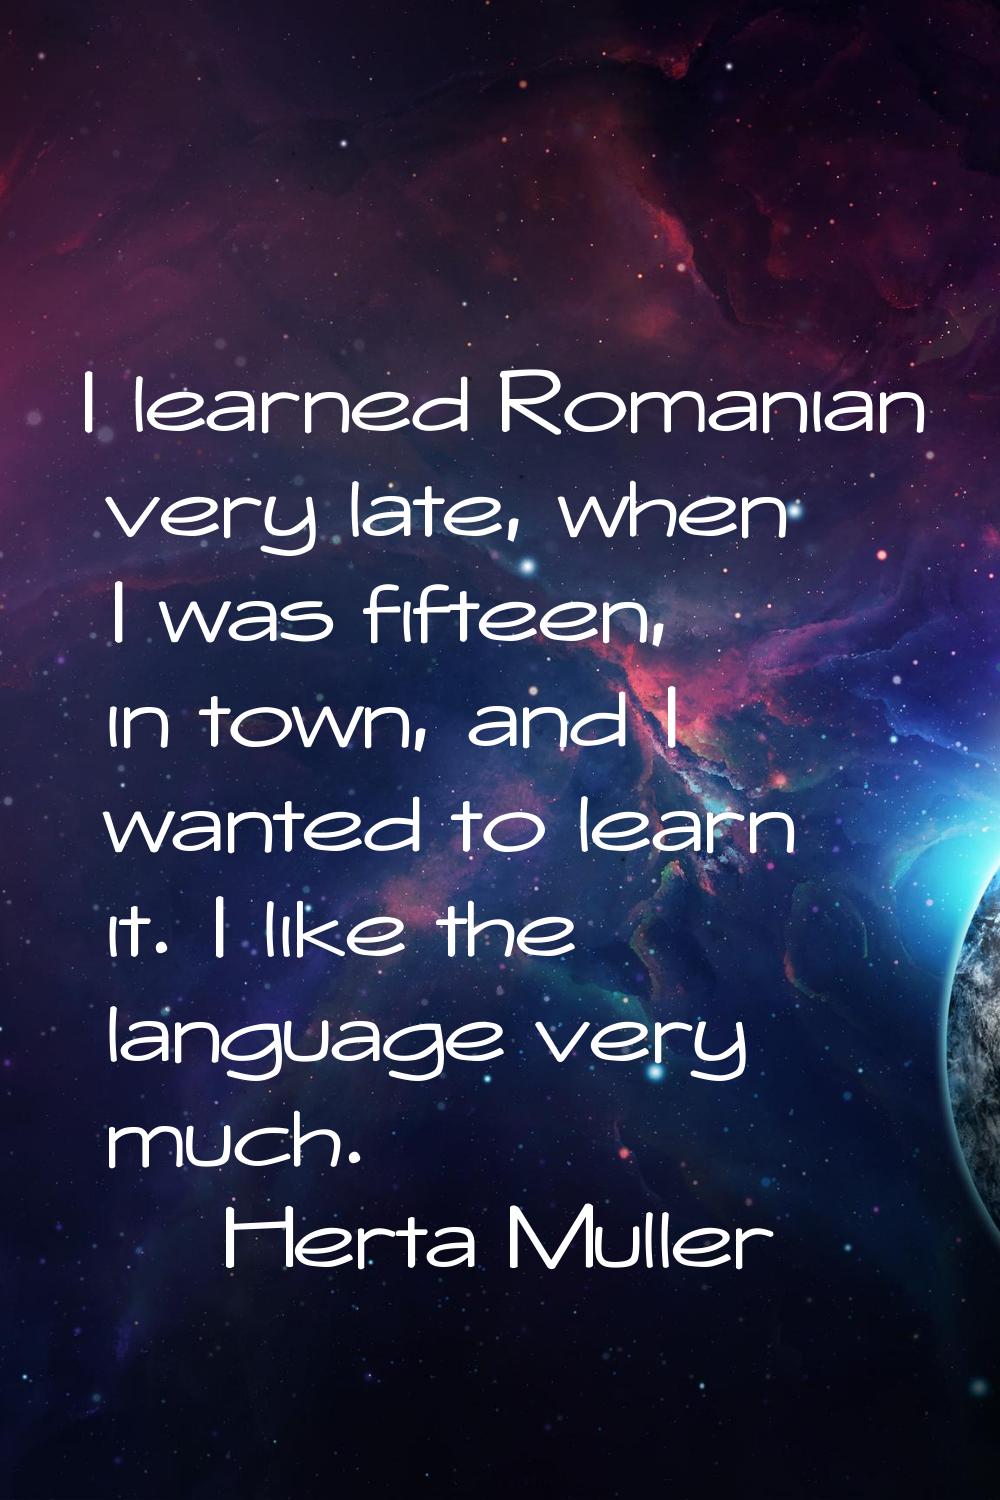 I learned Romanian very late, when I was fifteen, in town, and I wanted to learn it. I like the lan